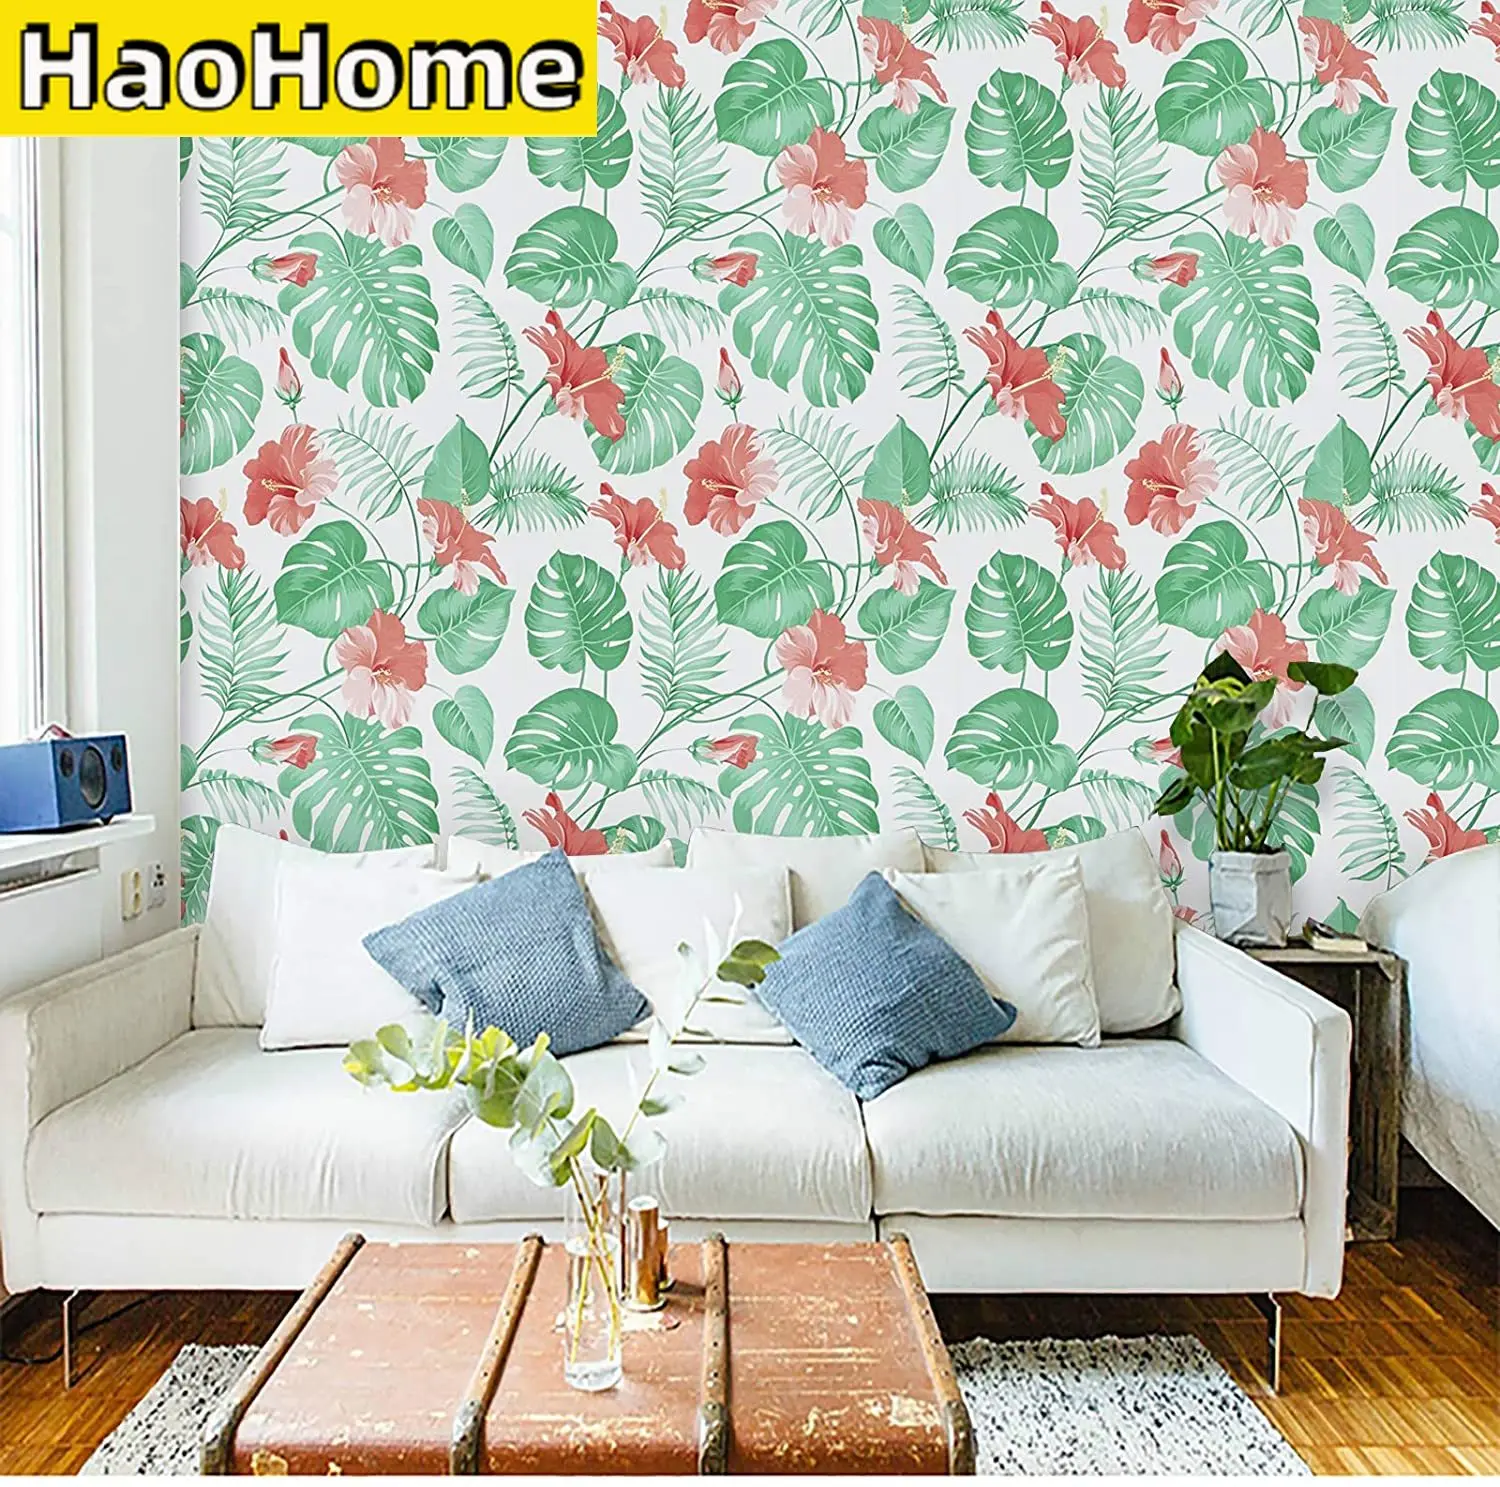 Red Floral Self Adhesive Wallpaper Tropical Flowers Peel and Stick Wallpaper Vinyl Waterproof Removable Palm Contact Paper